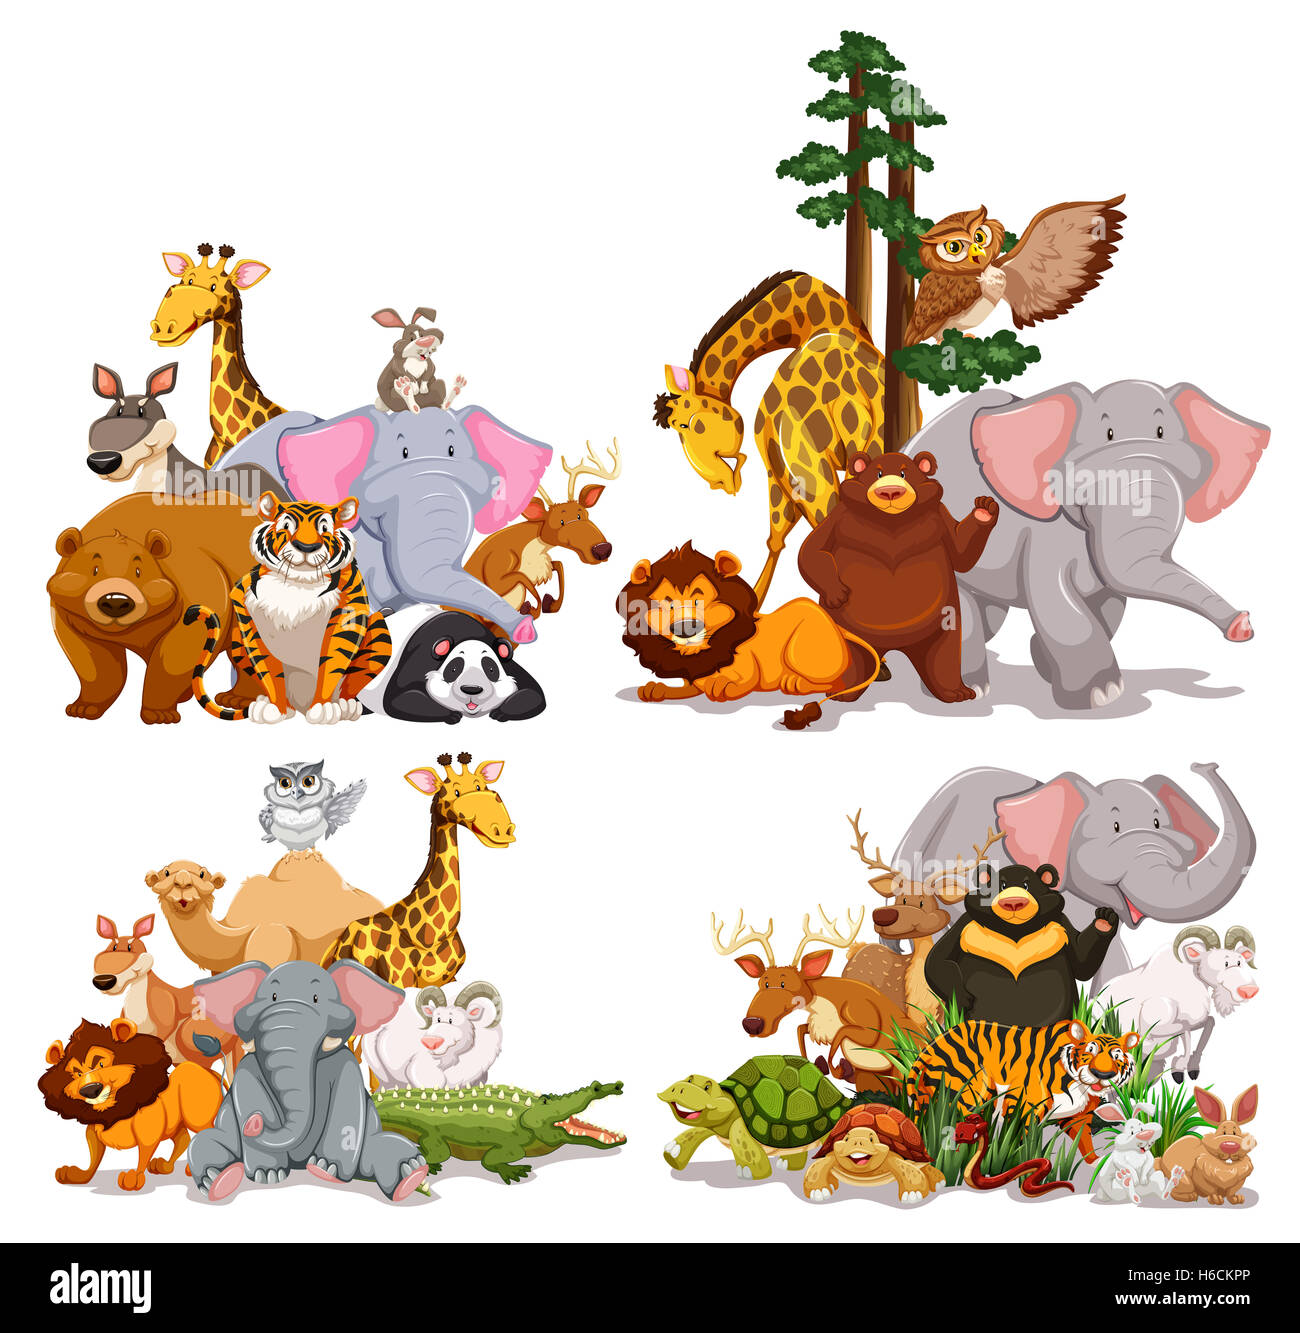 Group of different types of animals illustration Stock Photo - Alamy